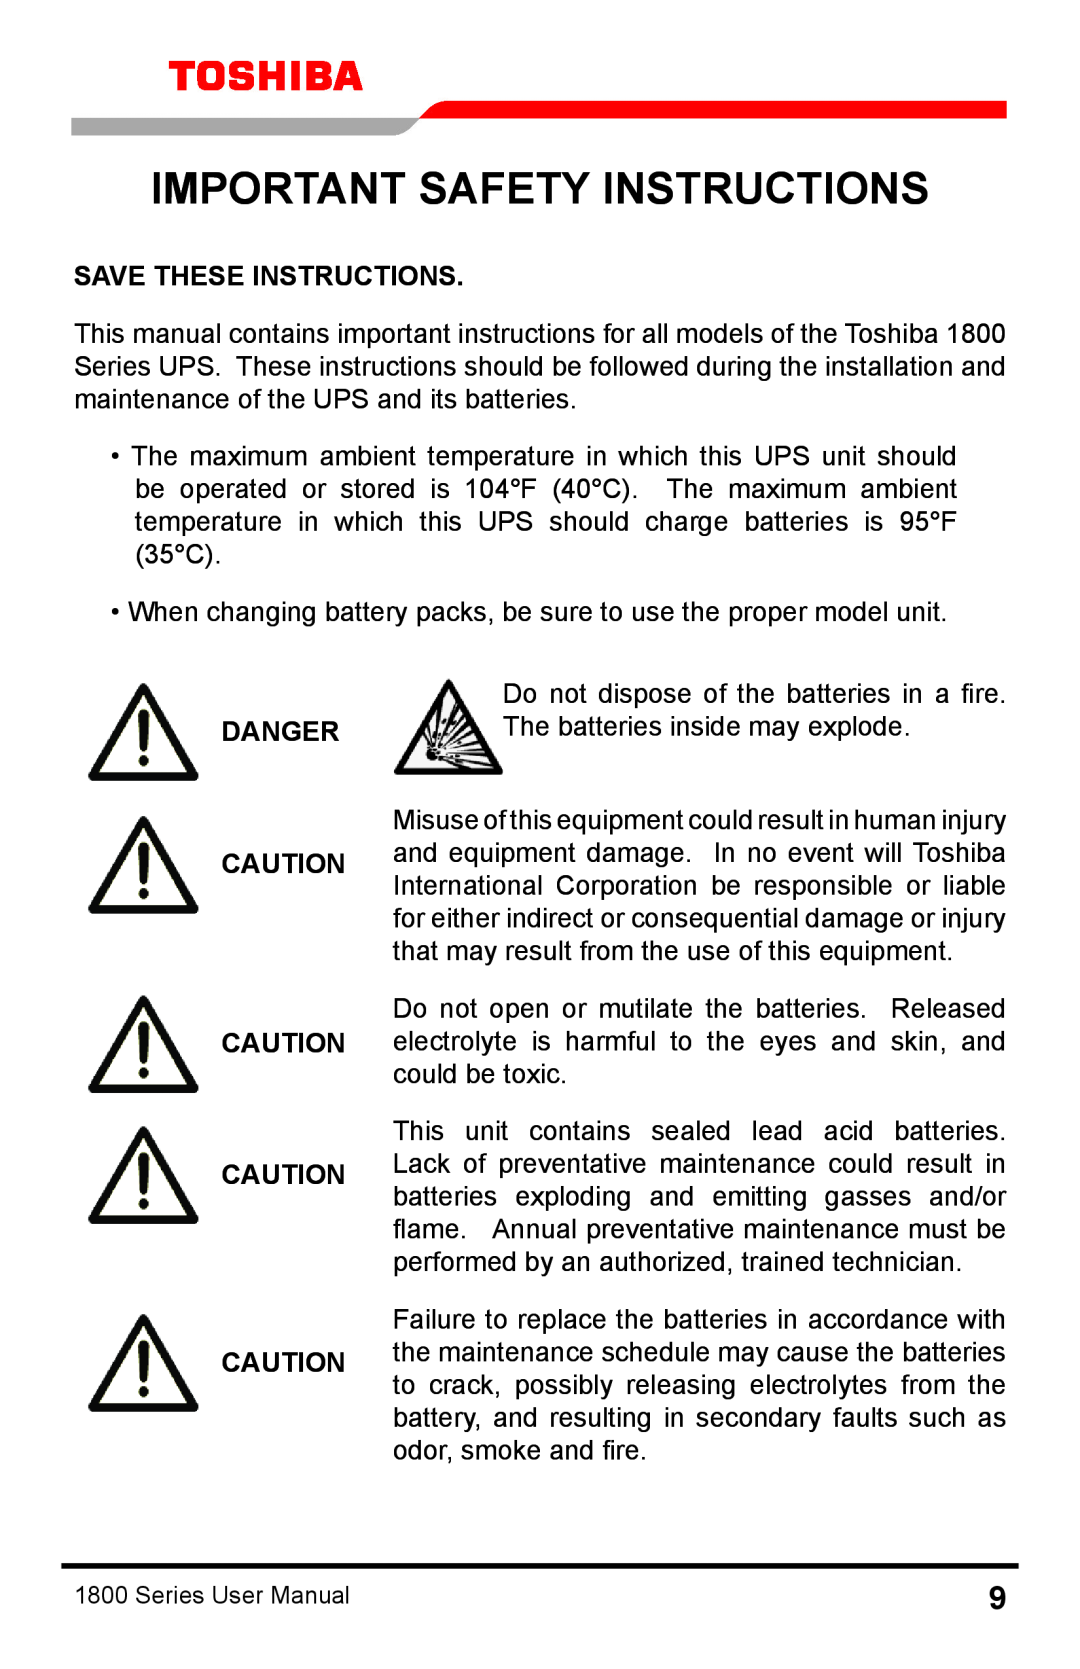 Toshiba 1800 manual Important Safety Instructions, Save These Instructions, Danger 